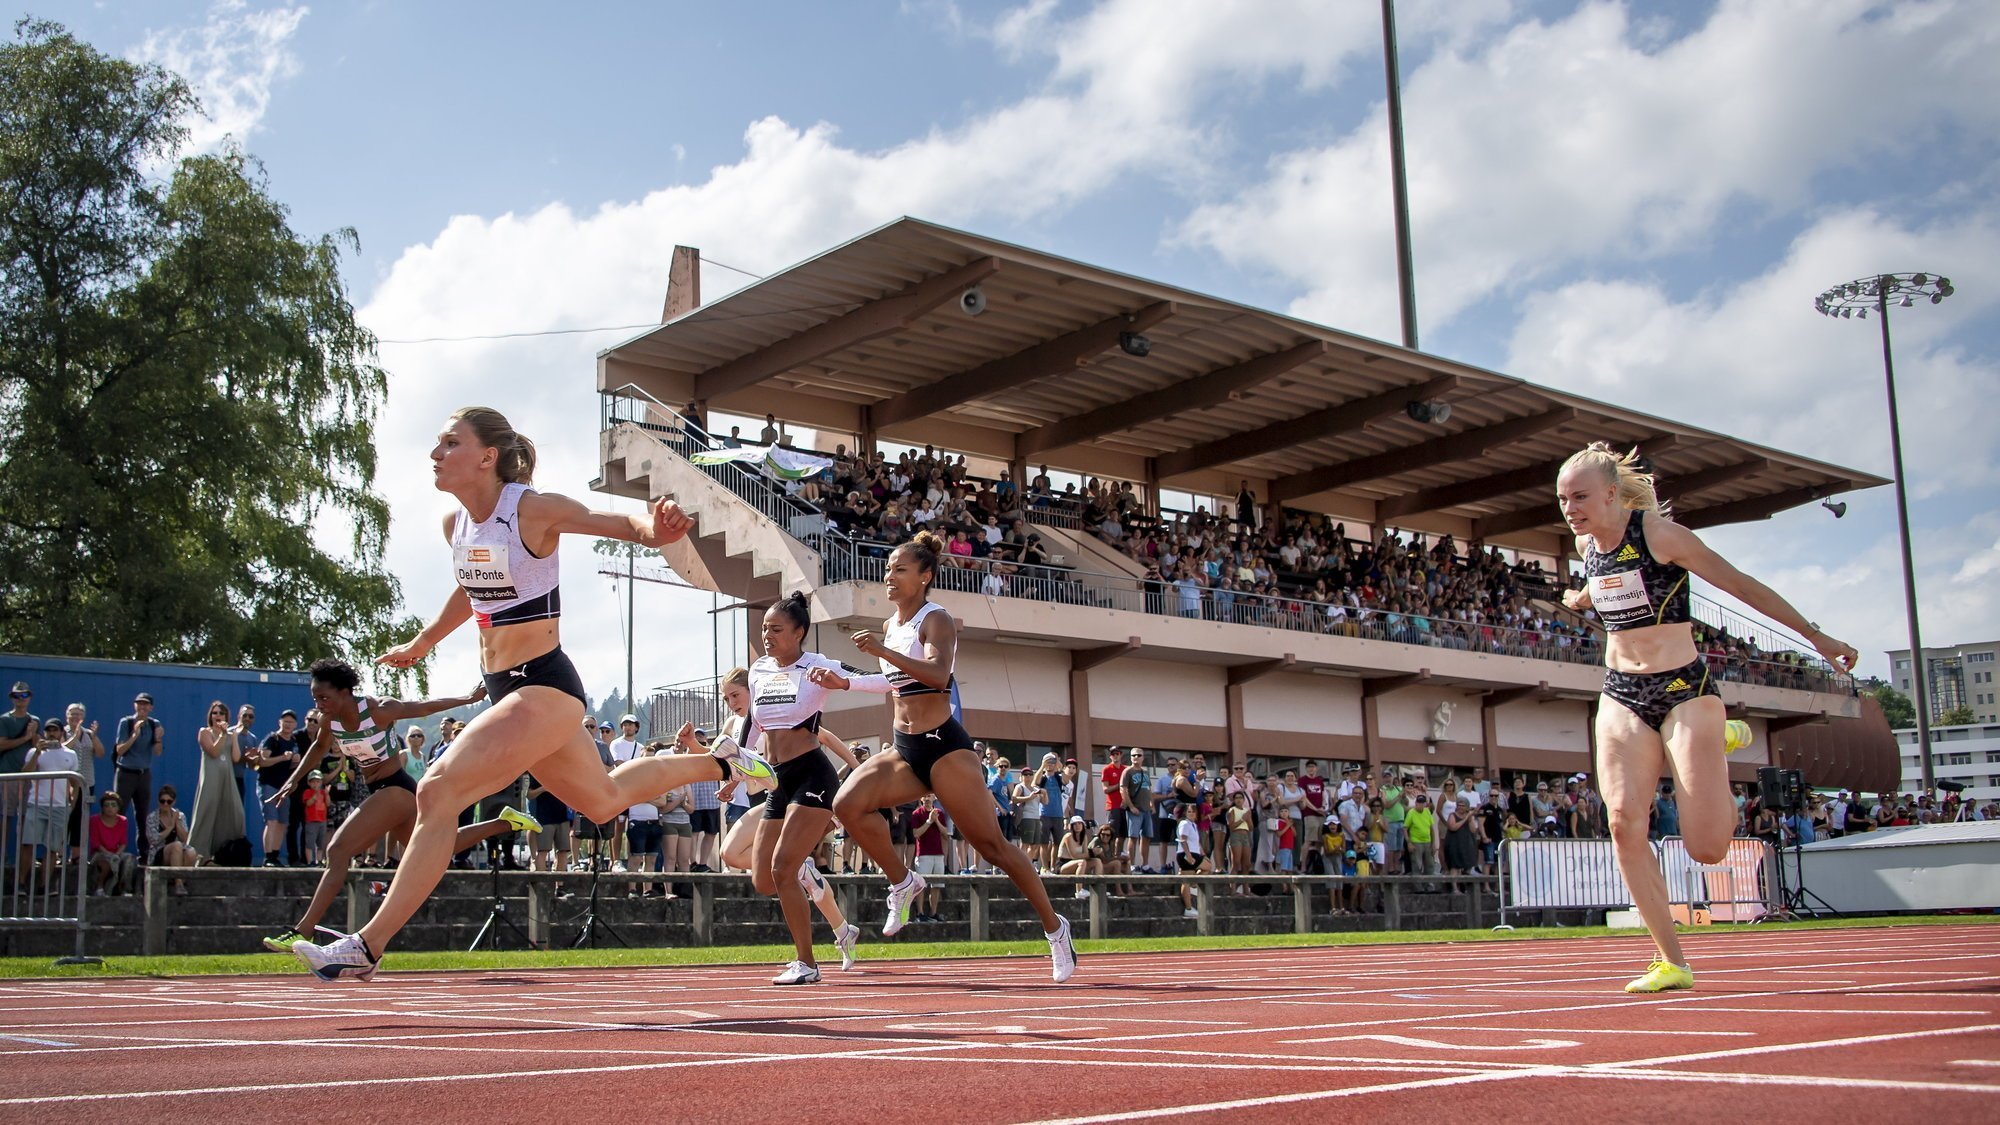 Athletes present at Résisprint International could have fun on a new track by 2023.